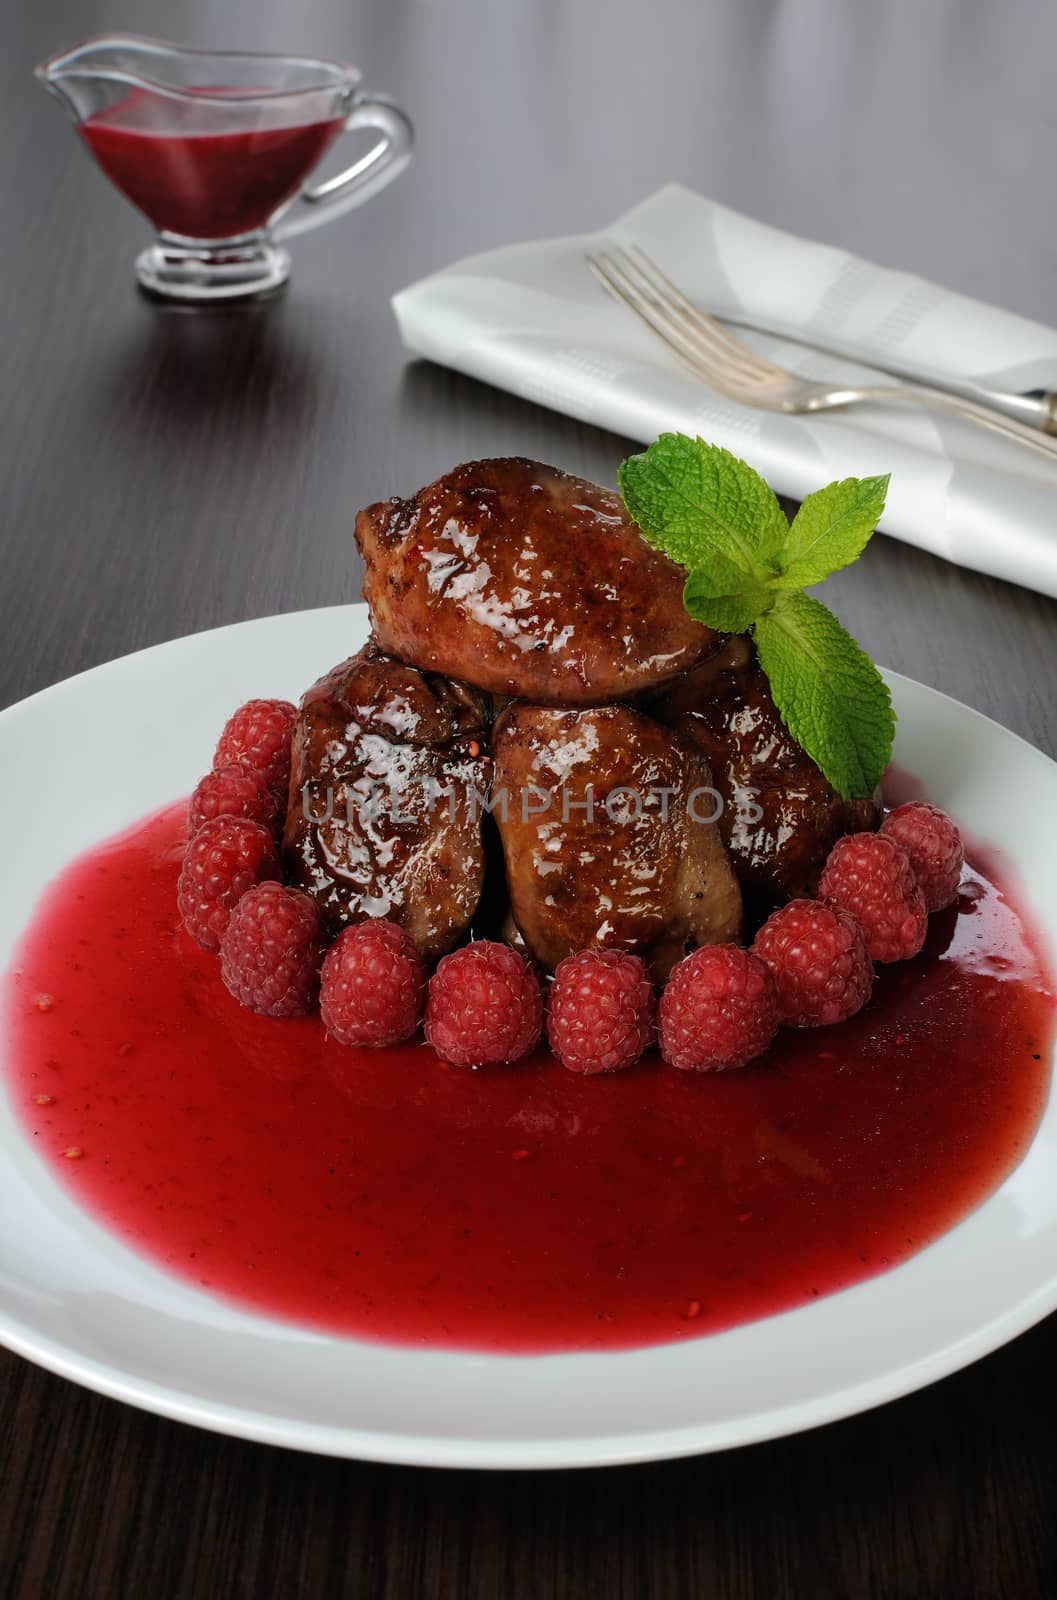 Chicken liver with raspberry sauce by Apolonia